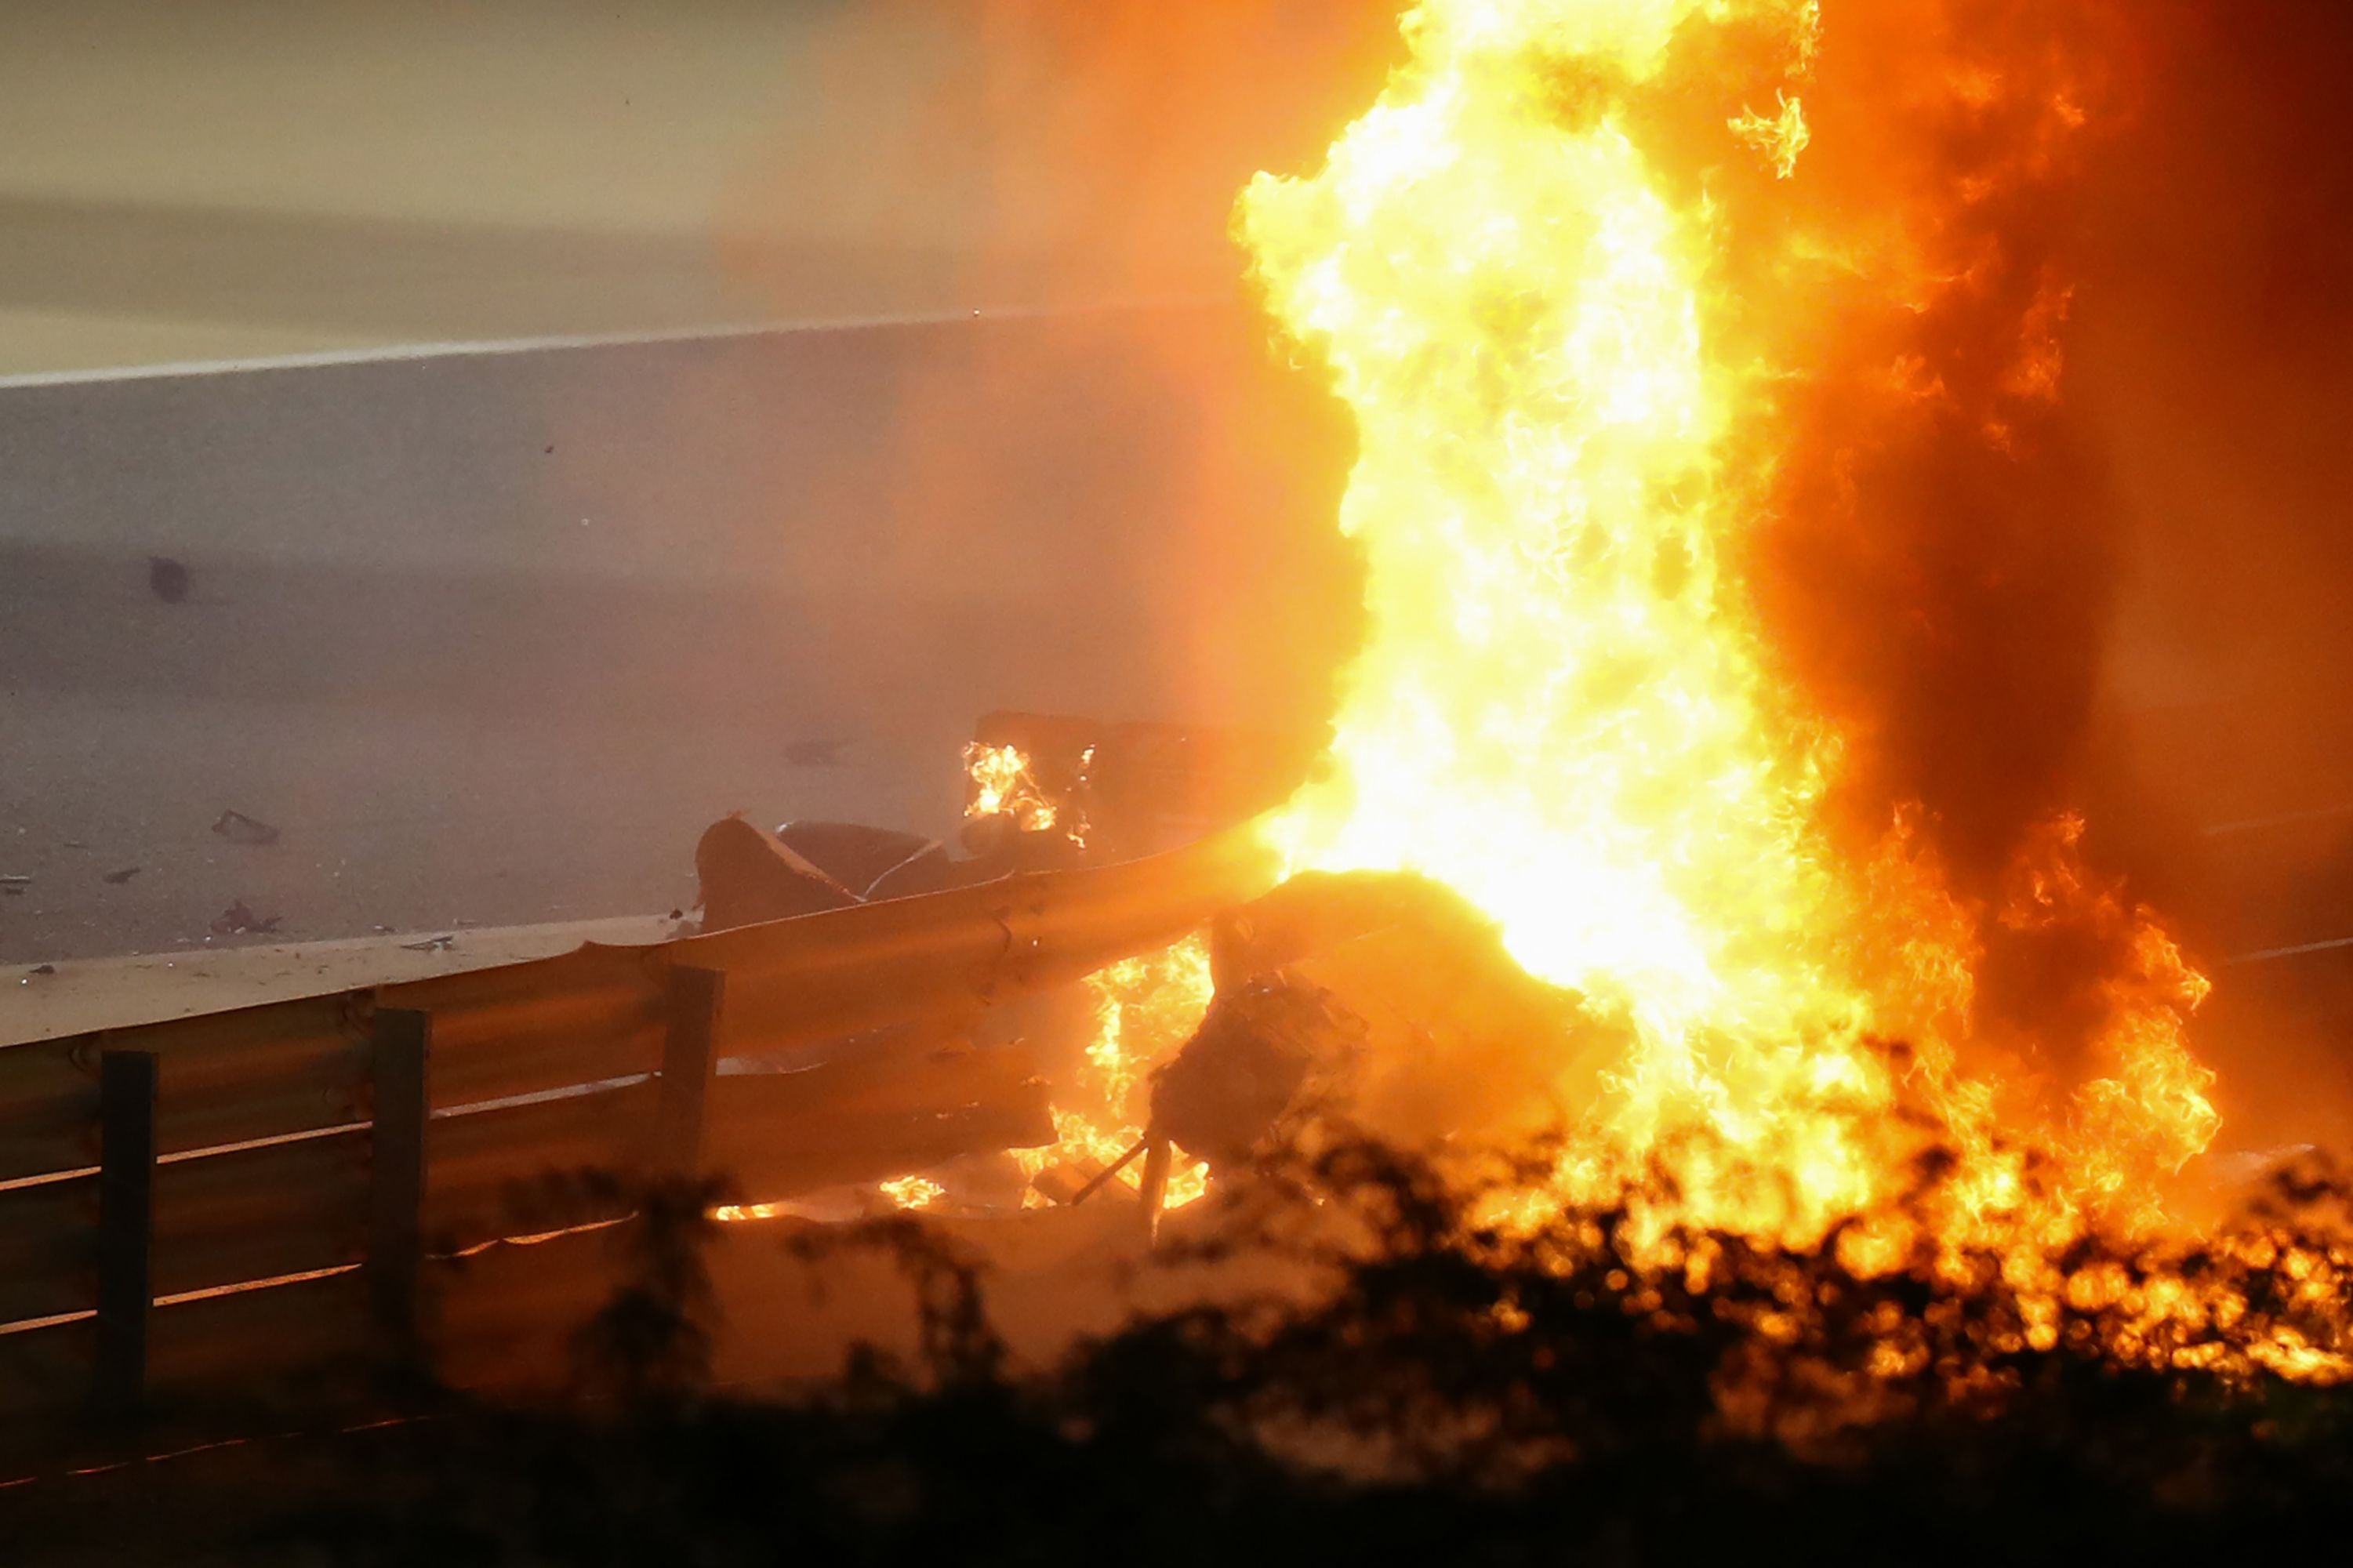 Grosjean’s car erupted into flames after hitting the barrier